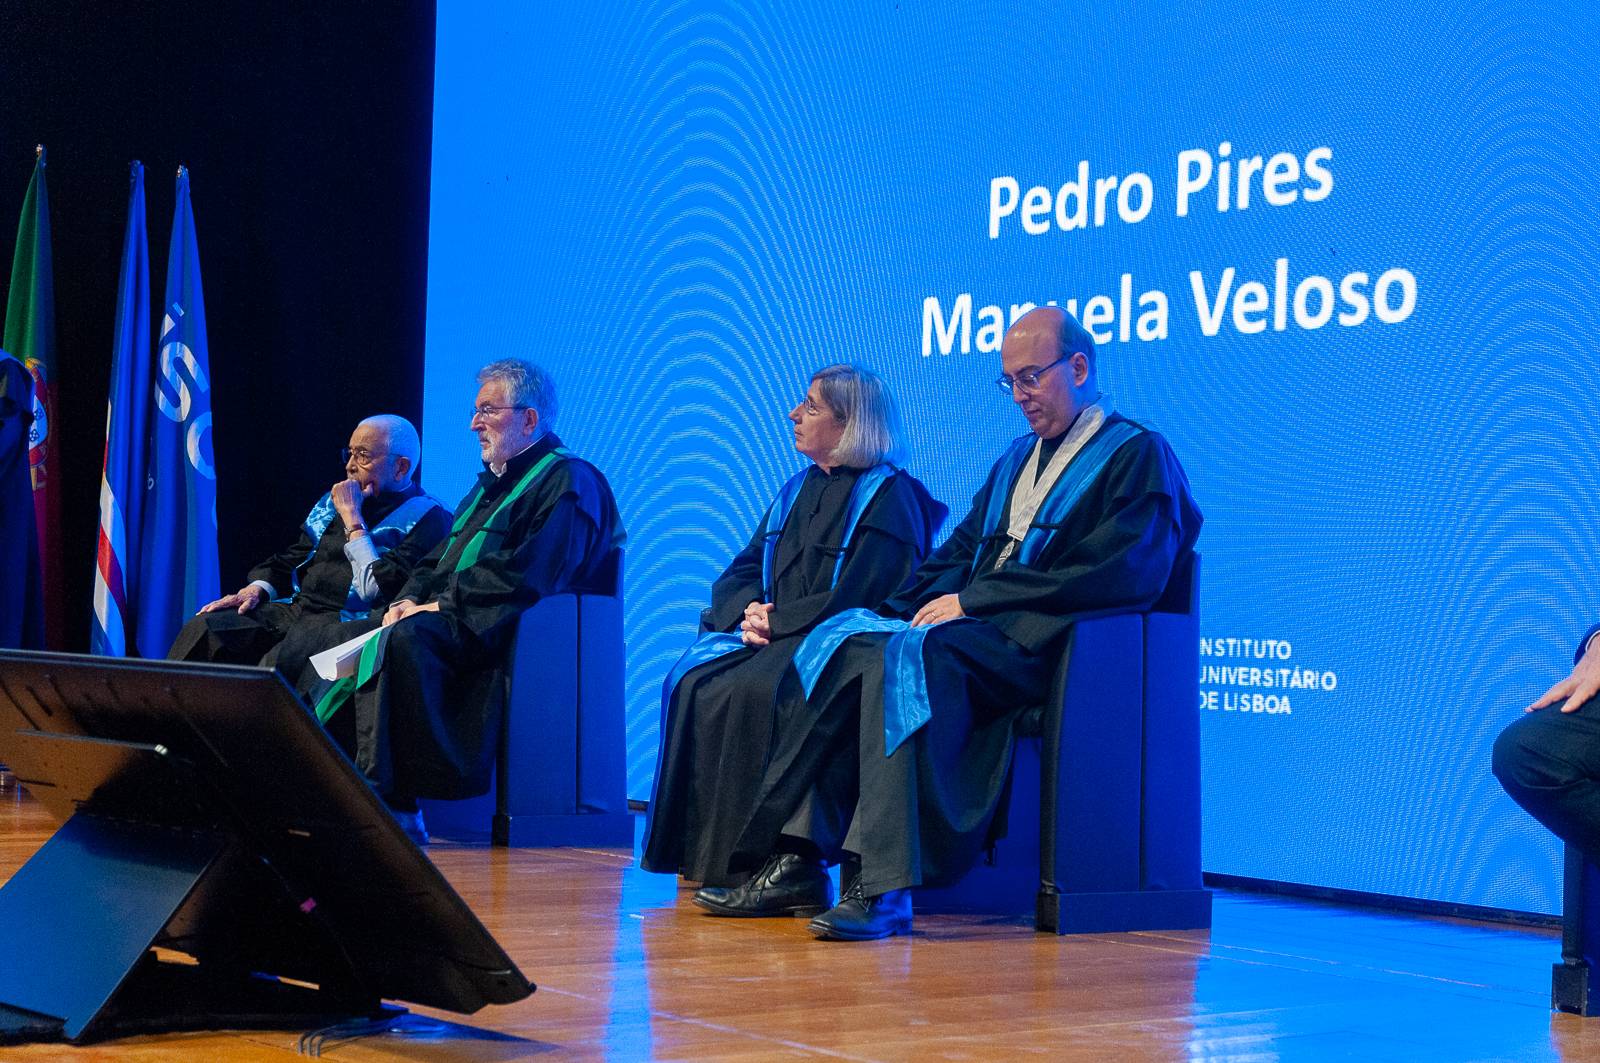 Honoris causa was awarded to underline the values of democracy and science